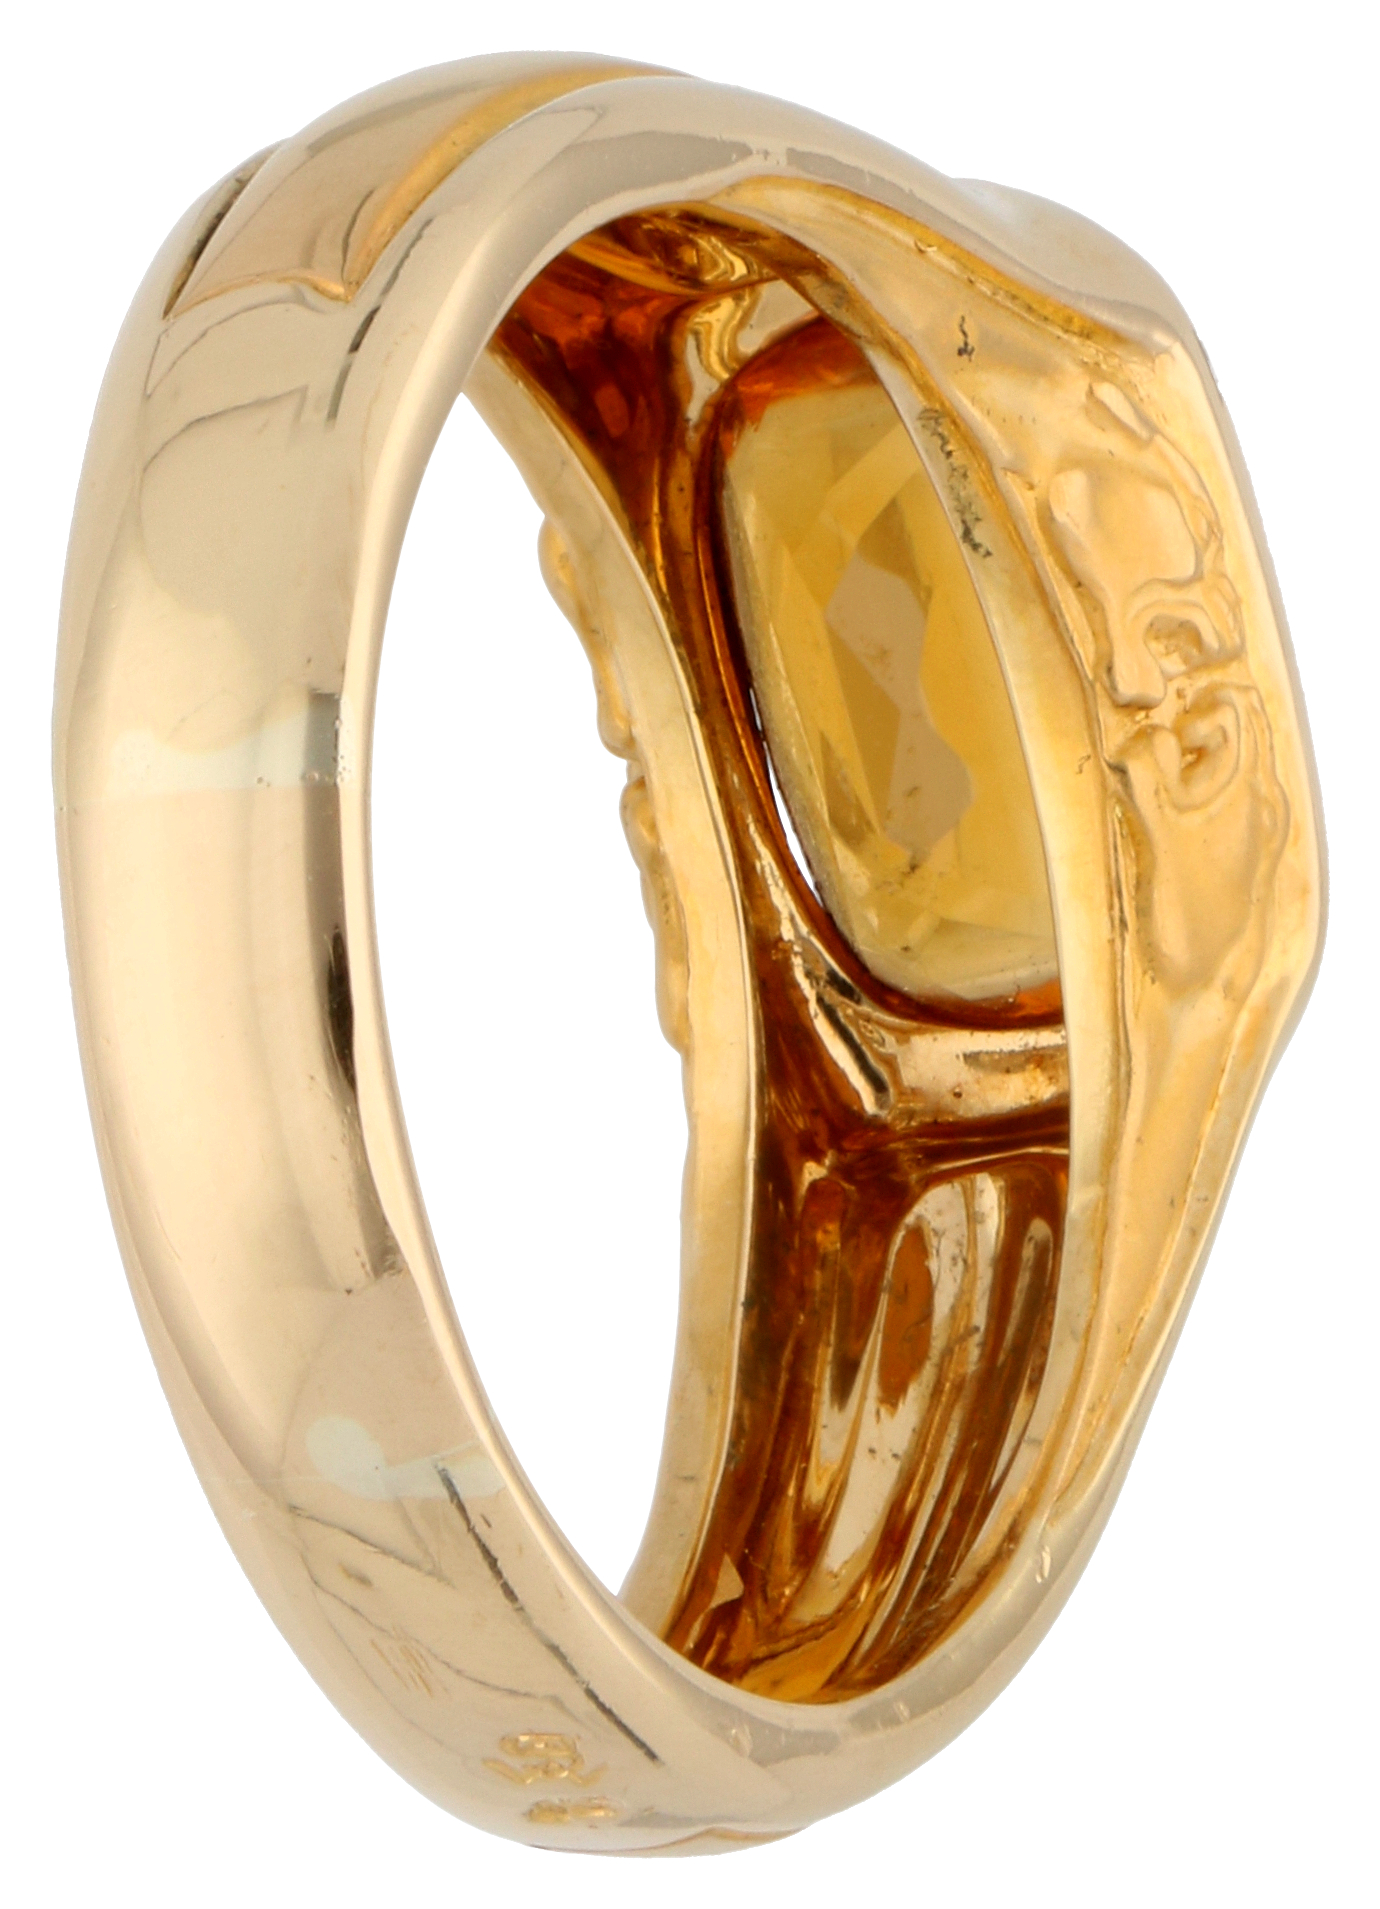 No Reserve - 18K Yellow gold ring with orange yellow citrine. - Image 2 of 4